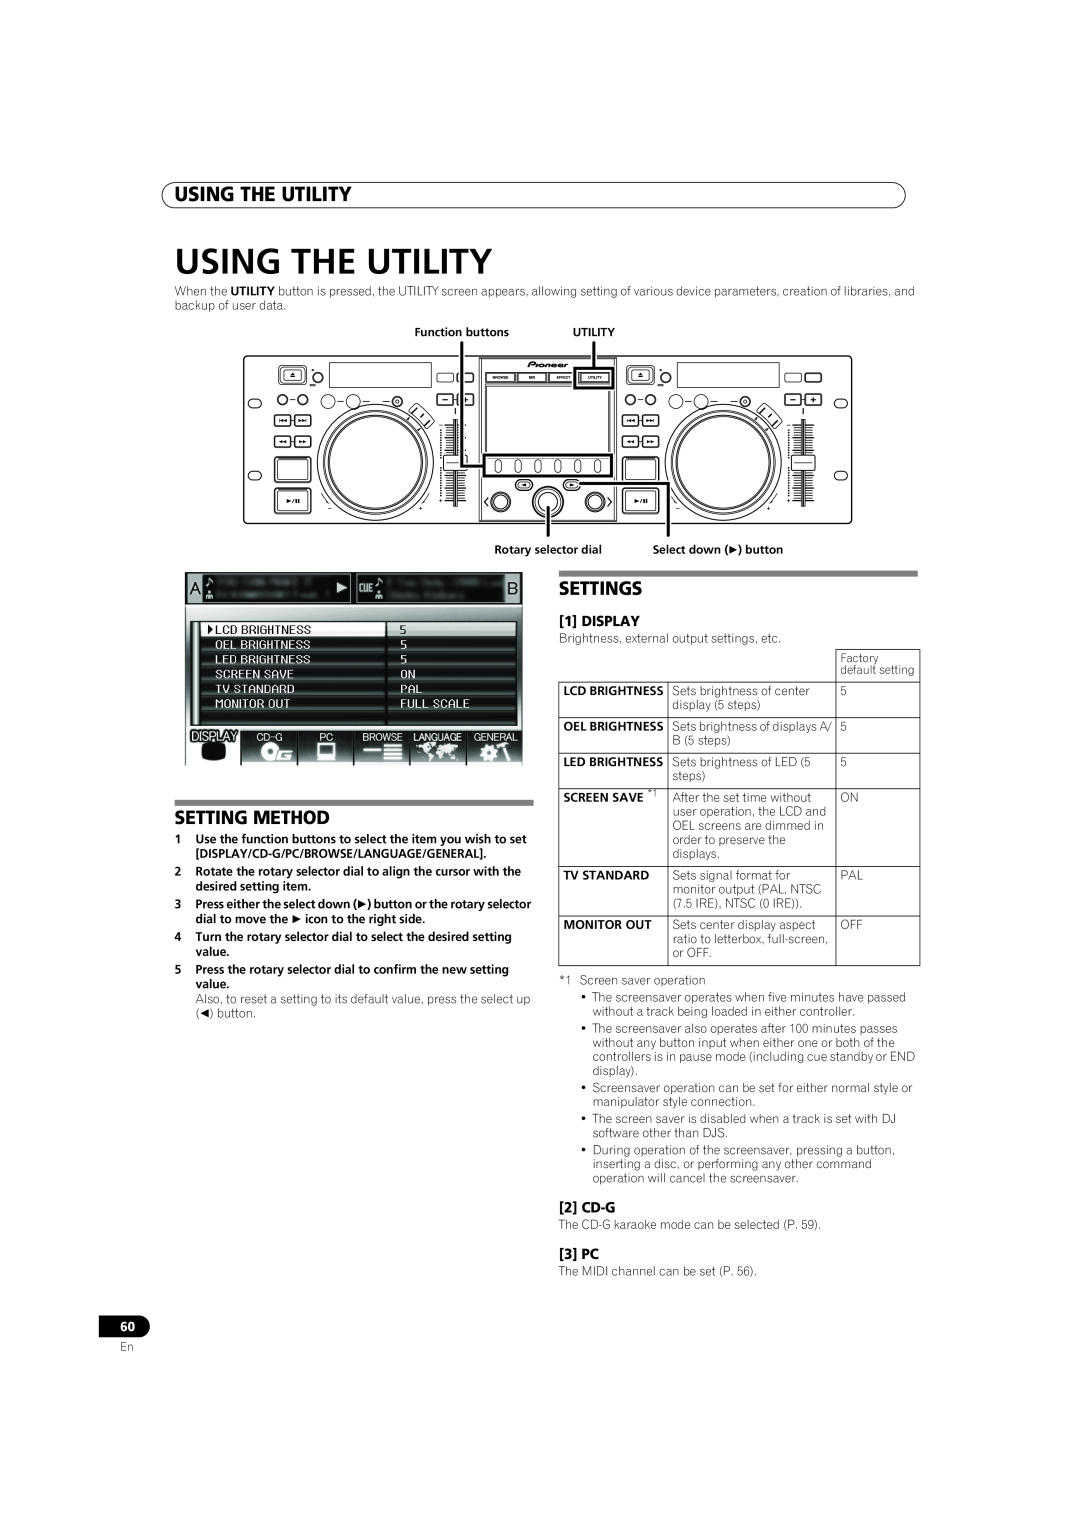 Pioneer MEP-7000 operating instructions Using The Utility, Setting Method, Settings 